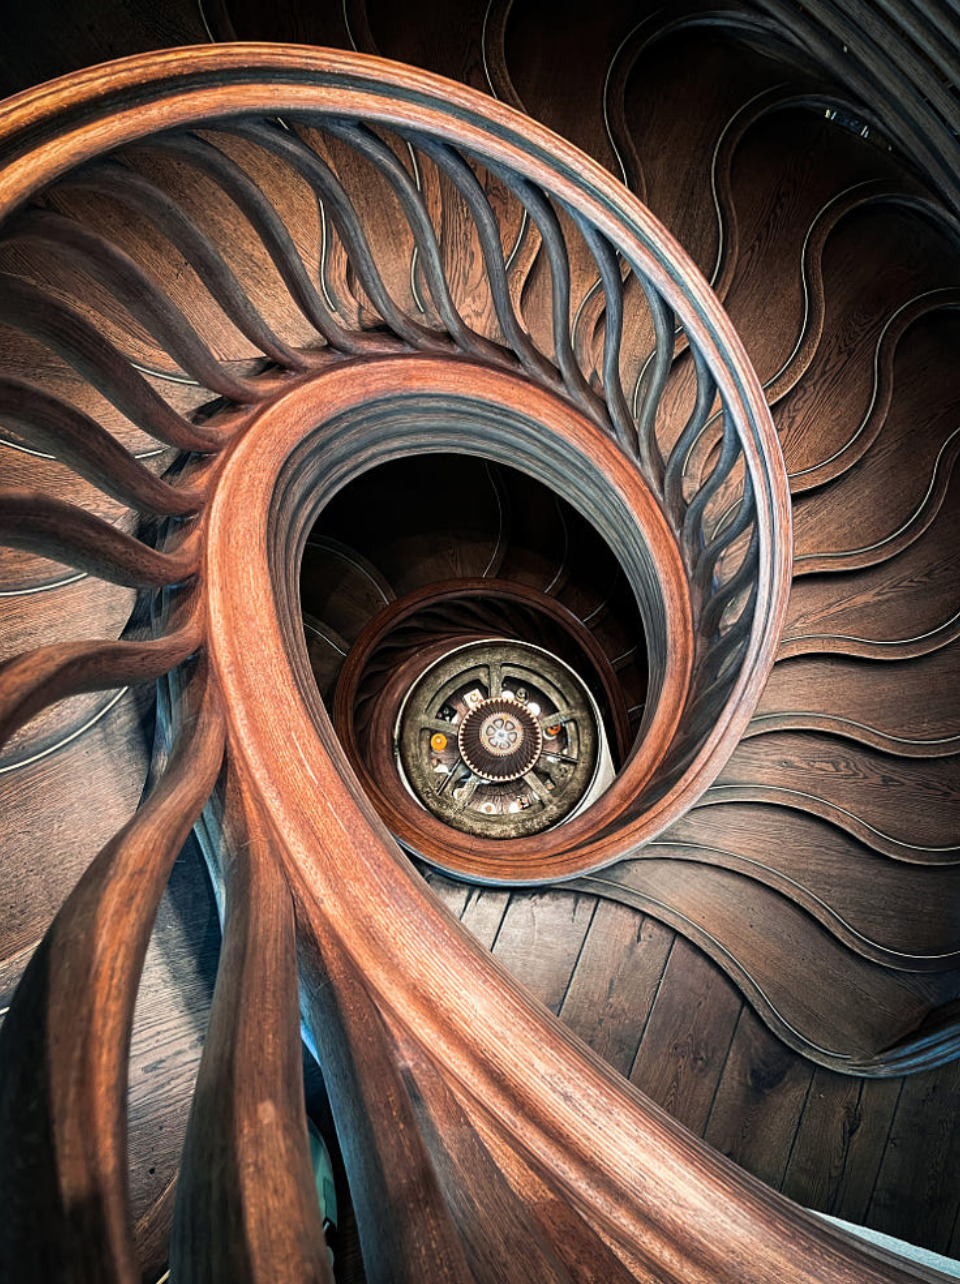 Hide Restaurant, London - Timber Staircase